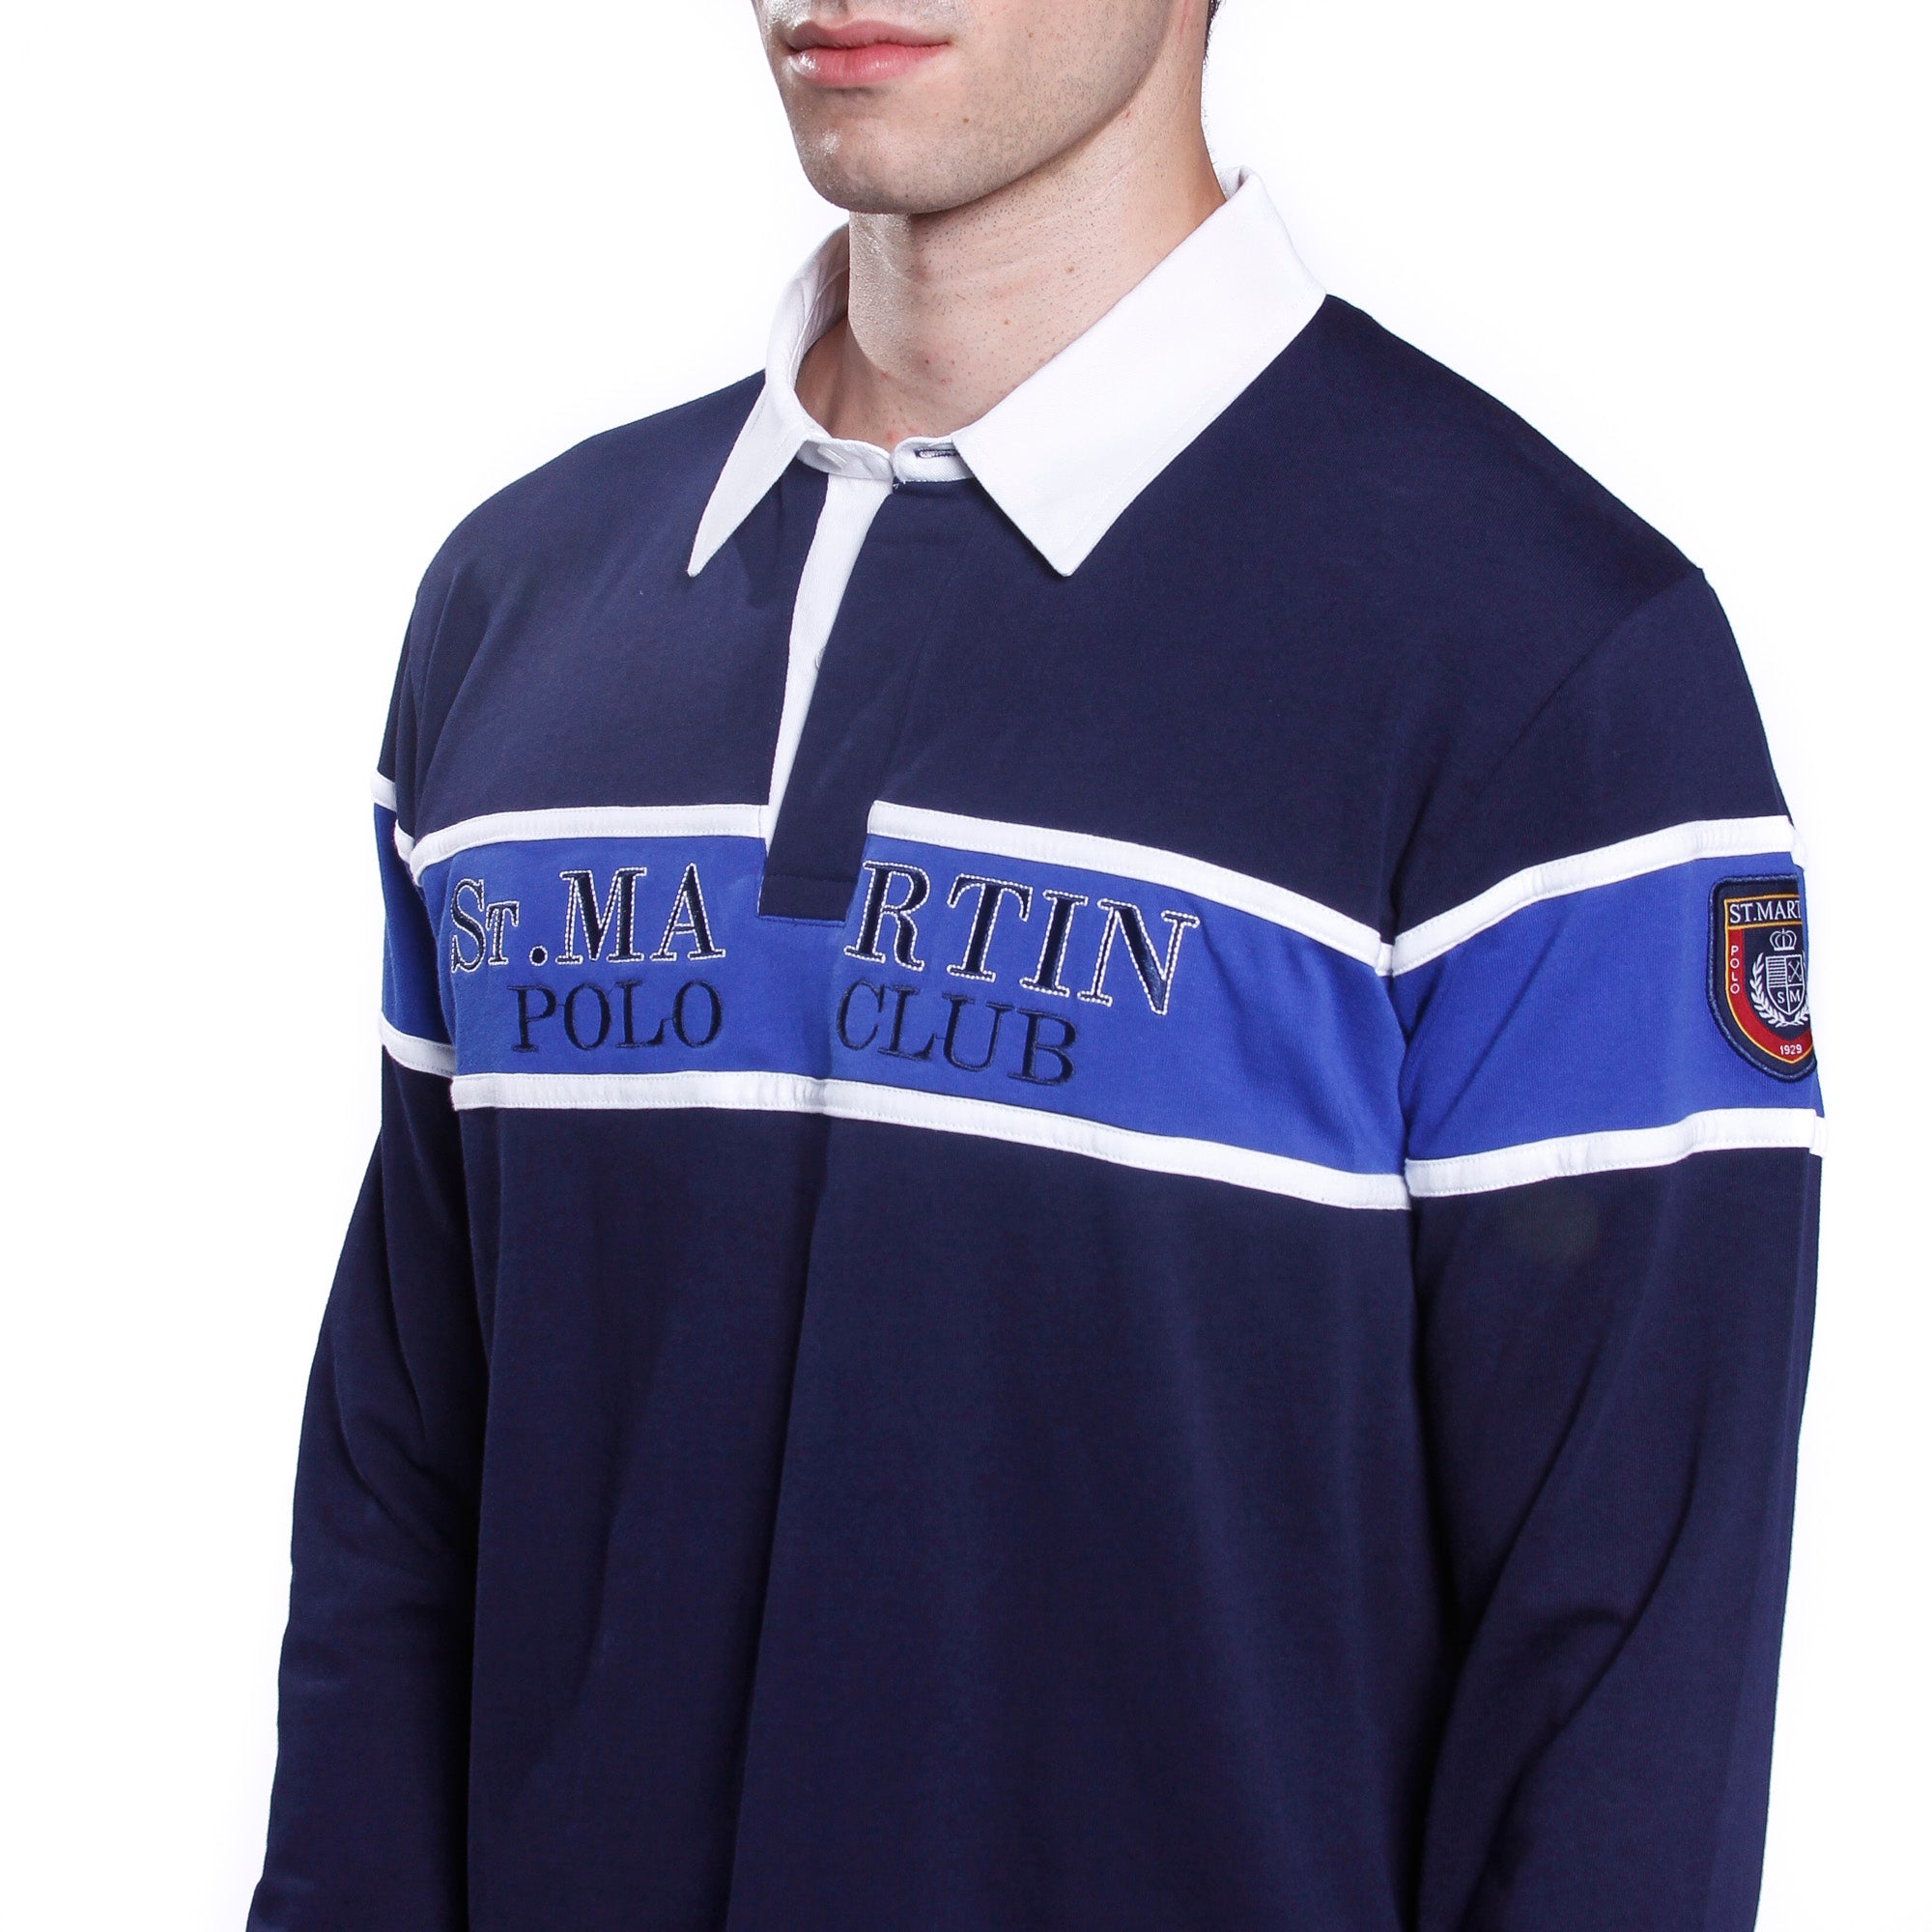 Jersey polo shirt with contrasting band and writing